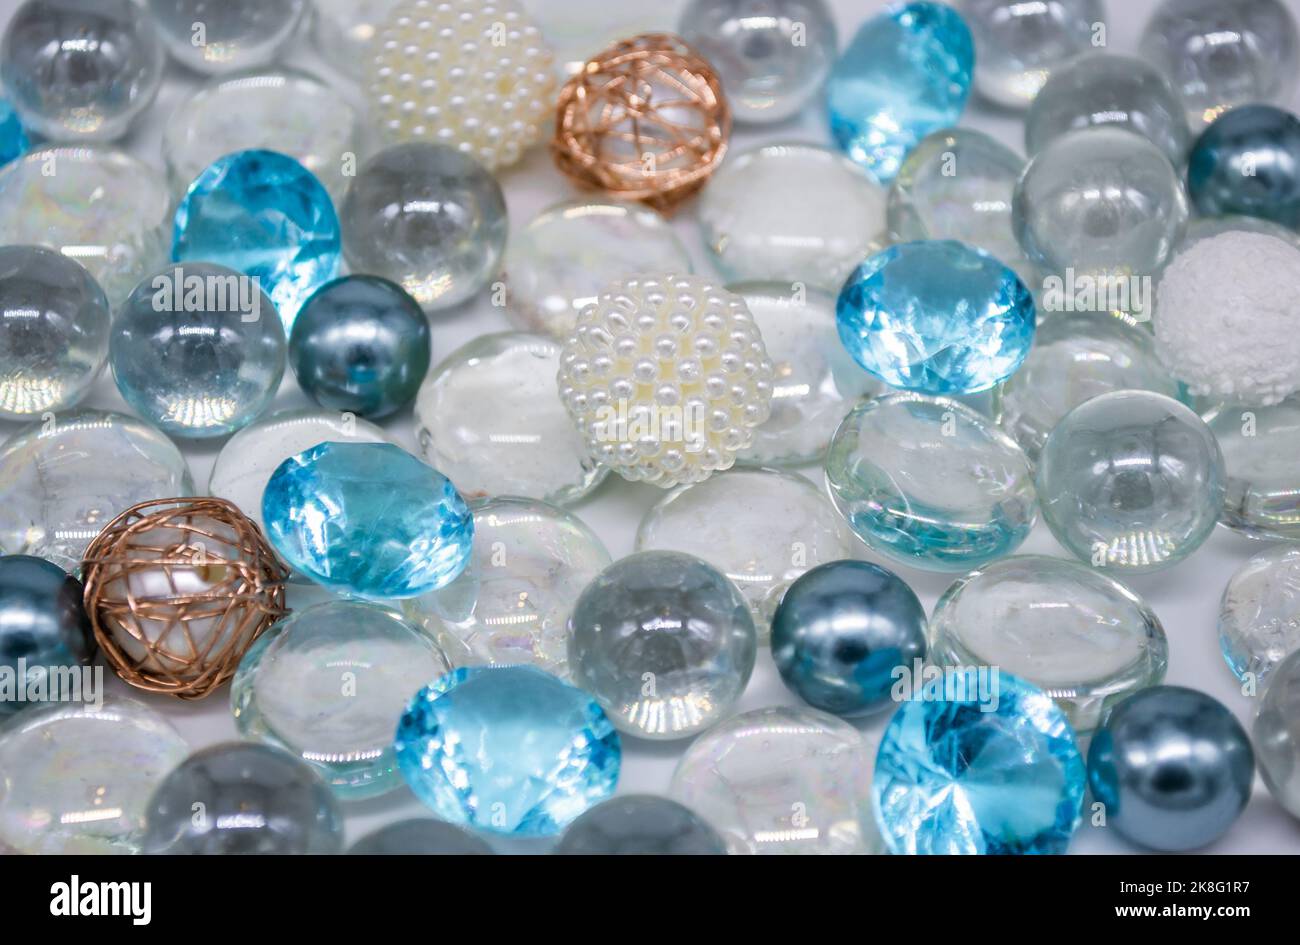 Beautiful background of transparent, light blue glass beads, crystals and white pearls. Copy space. Stock Photo